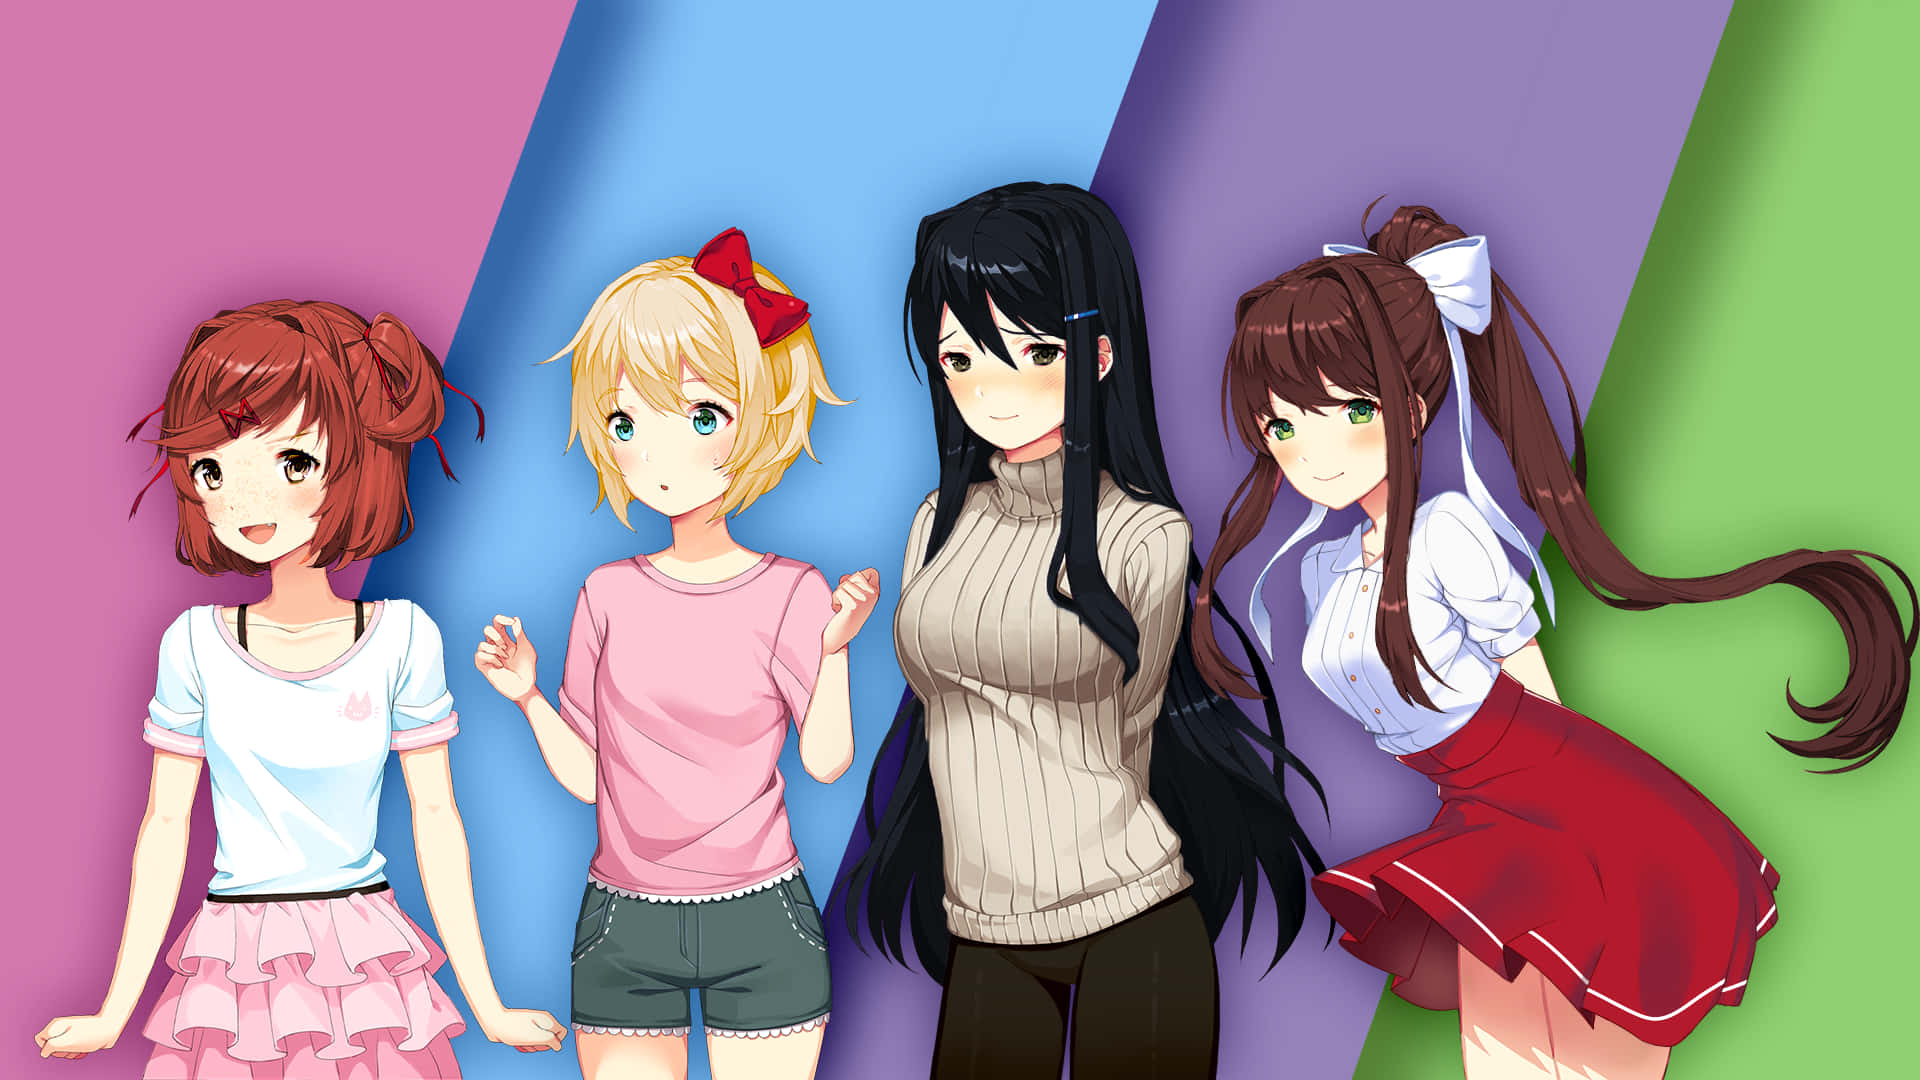 Ddlc Main Characters On Colorful Background Wallpaper